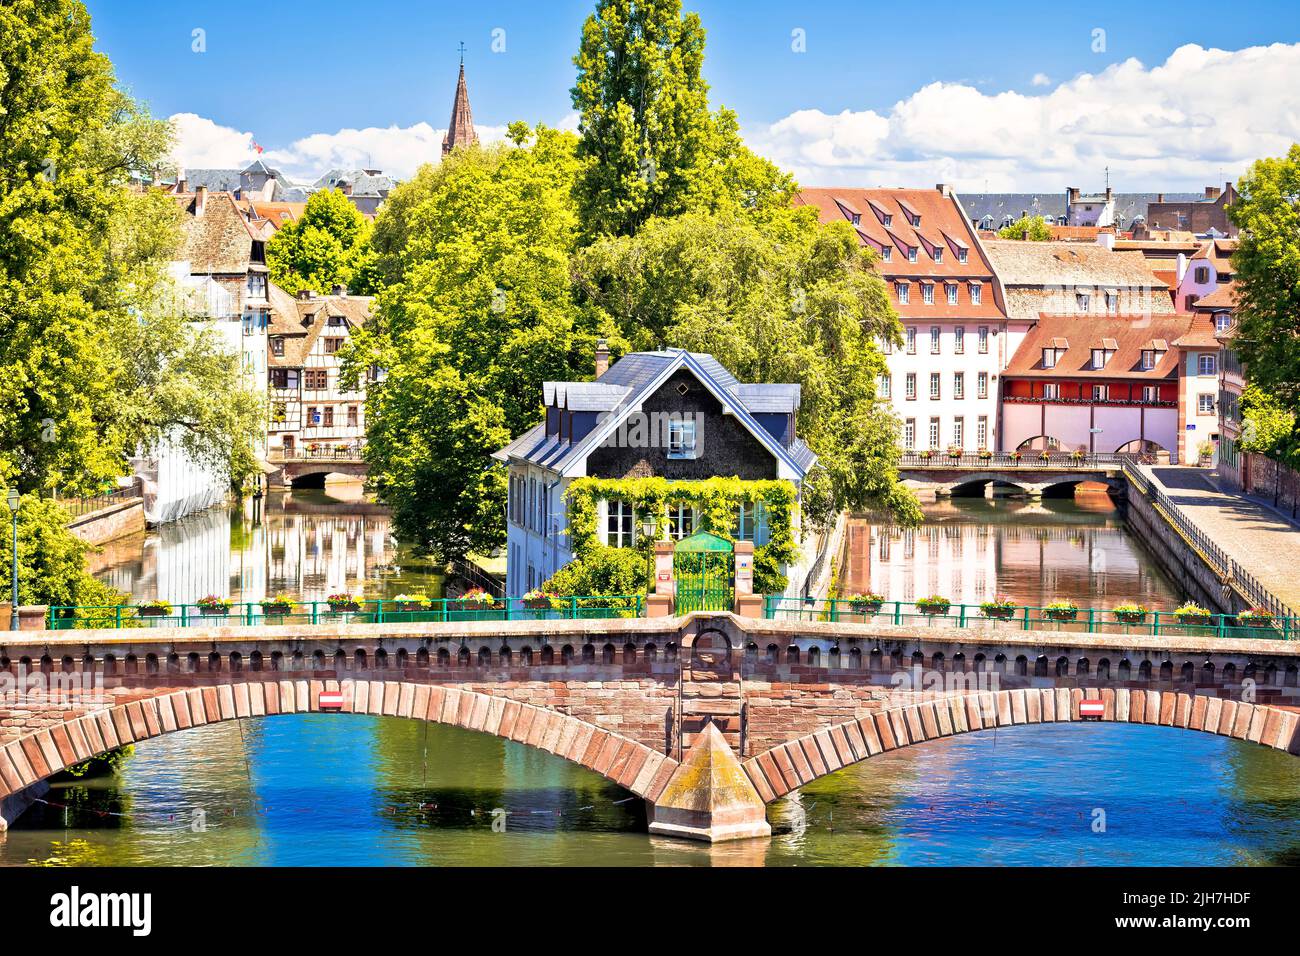 Strasbourg Barrage Vauban scenic river and architecture view, Alsace region of France Stock Photo